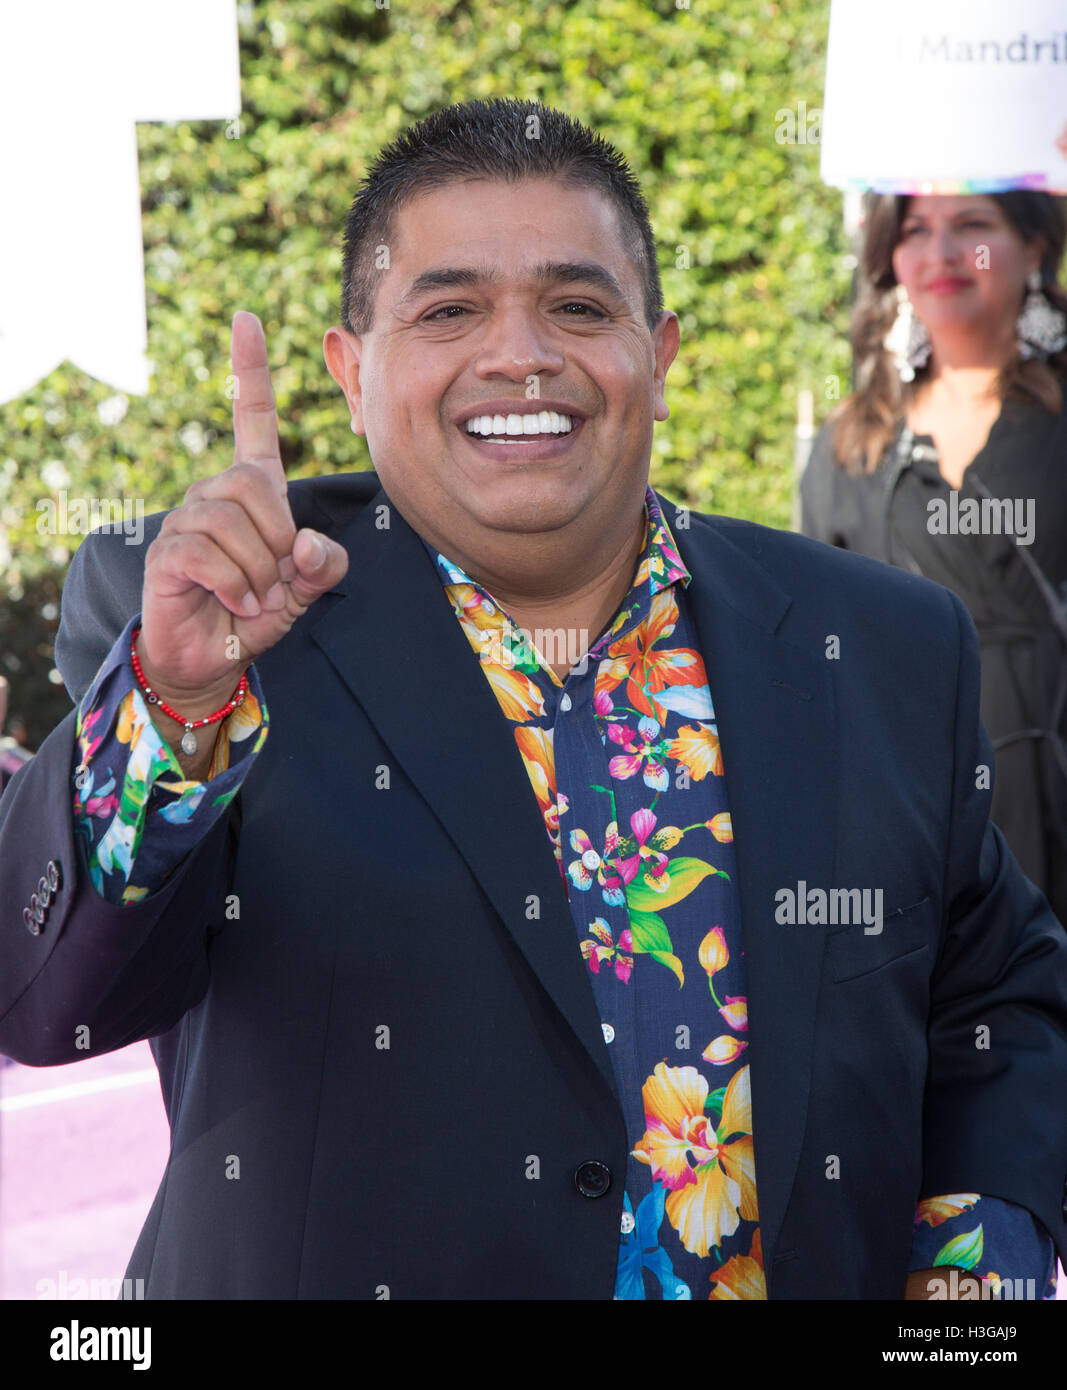 Hollywood, California, USA. 6th Oct, 2016. El Mandril attends the 2016 Latin American Music Awards at Dolby Theatre on October 6, 2016 in Hollywood, California. © The Photo Access/Alamy Live News Stock Photo